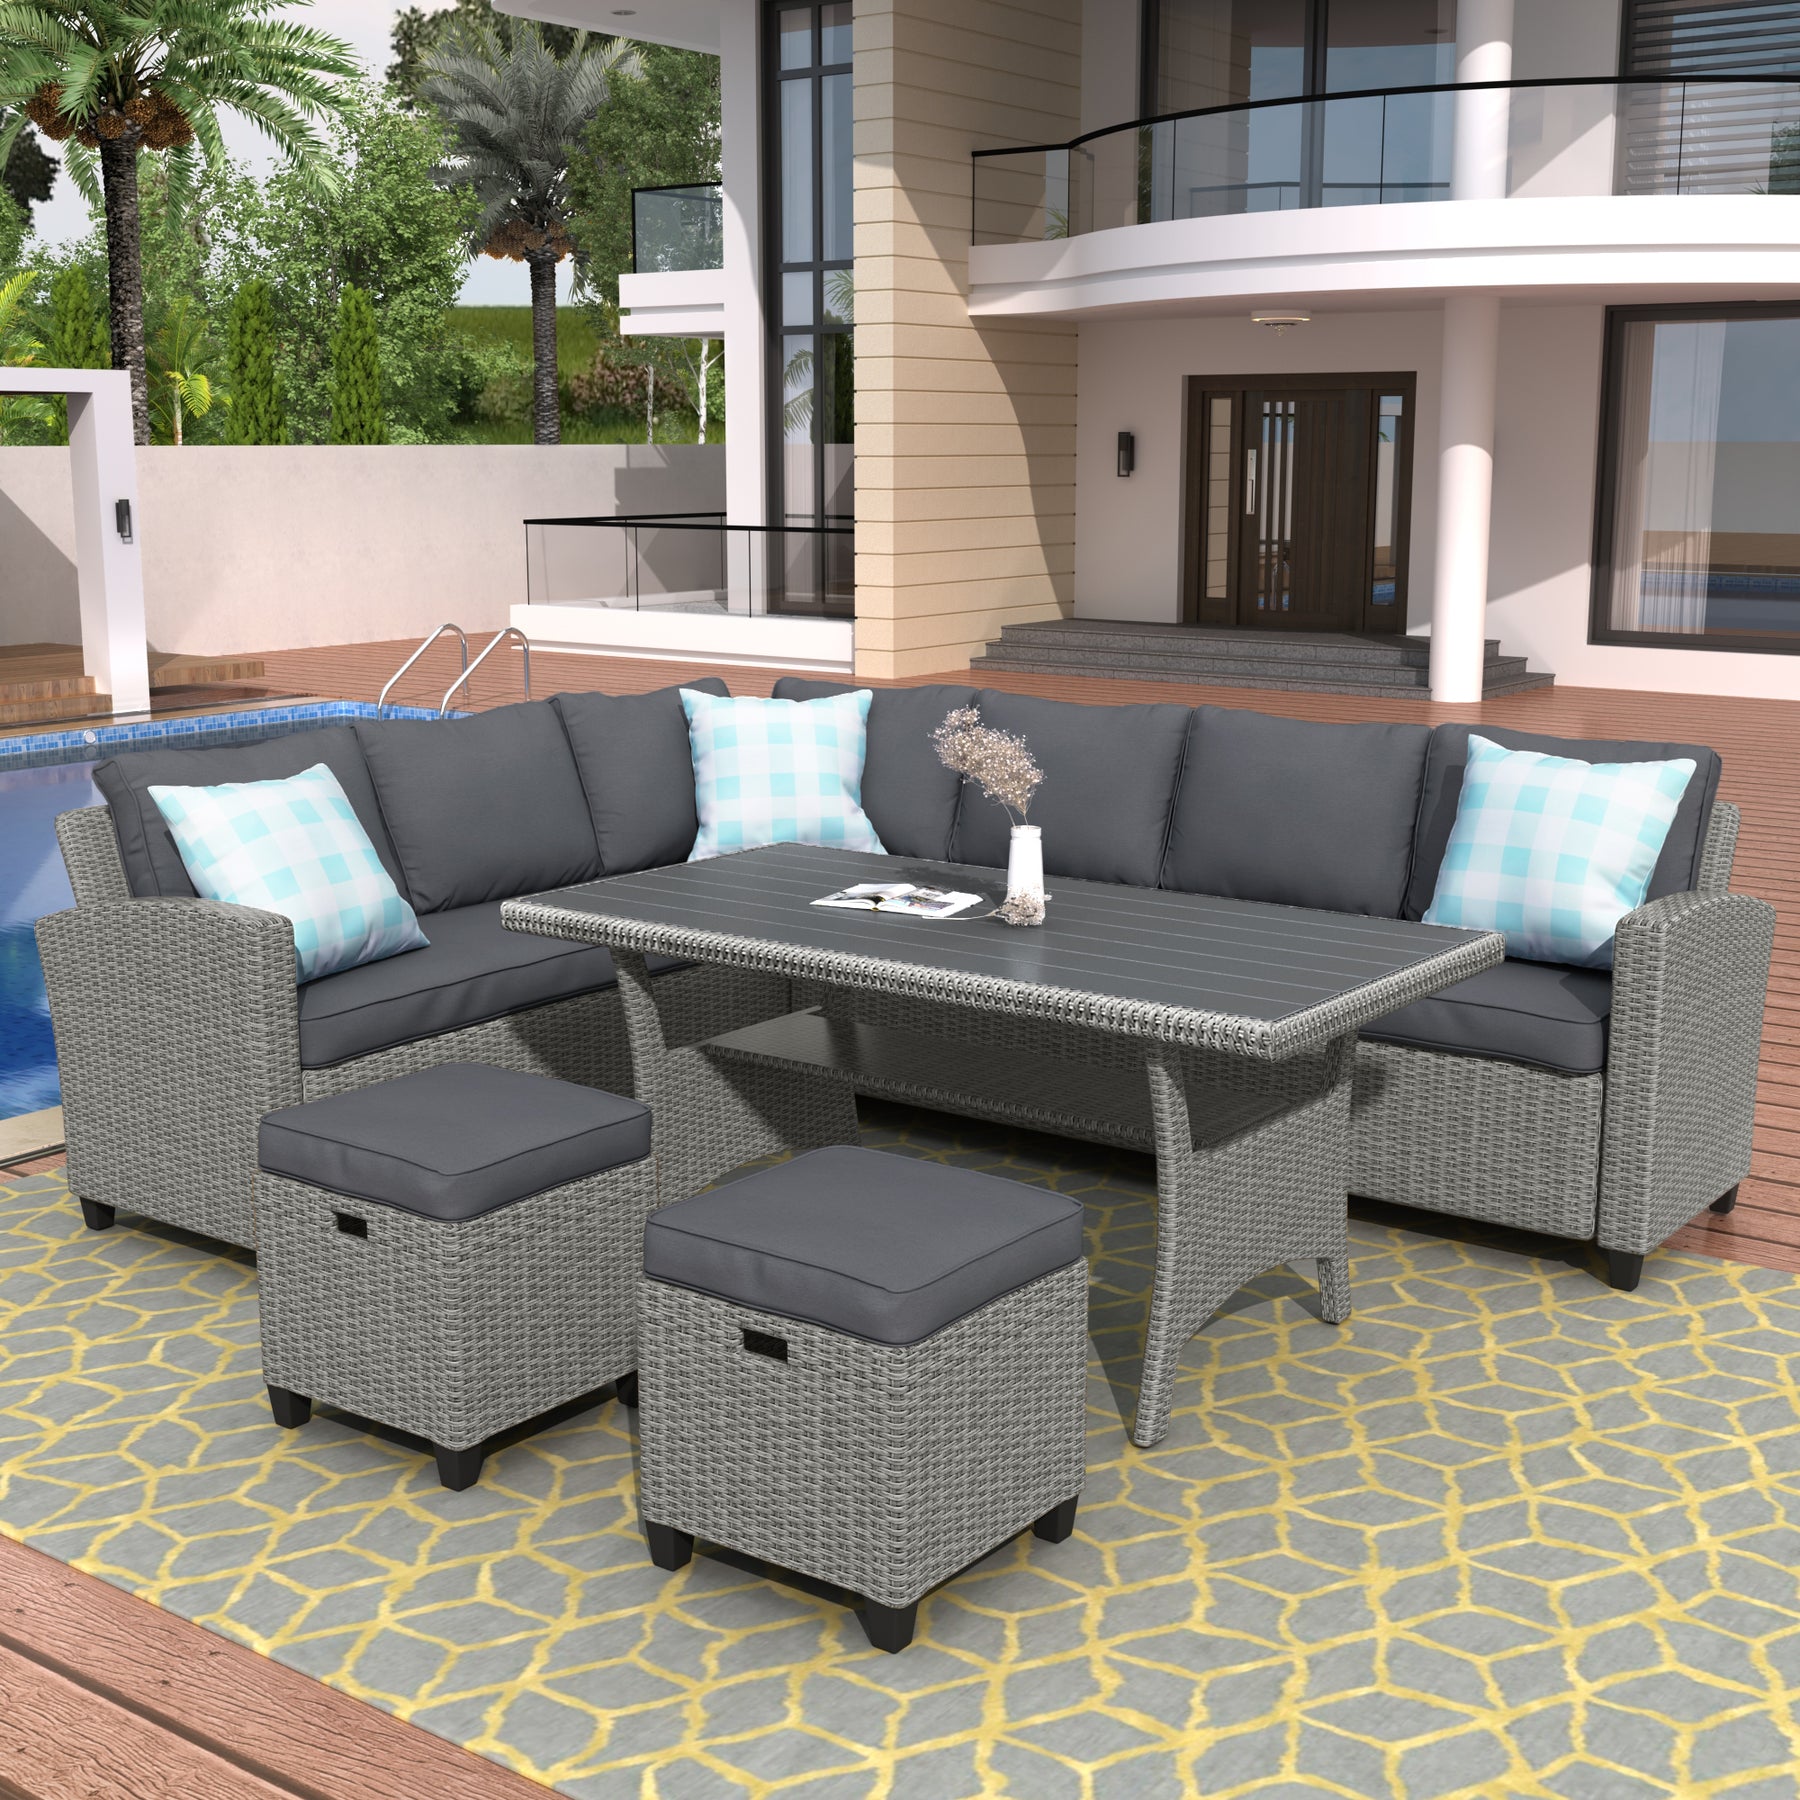 U_STYLE Patio Furniture Set, 5 Piece Outdoor Conversation Set,  Dining Table Chair with Ottoman and Throw Pillows - Tonkn